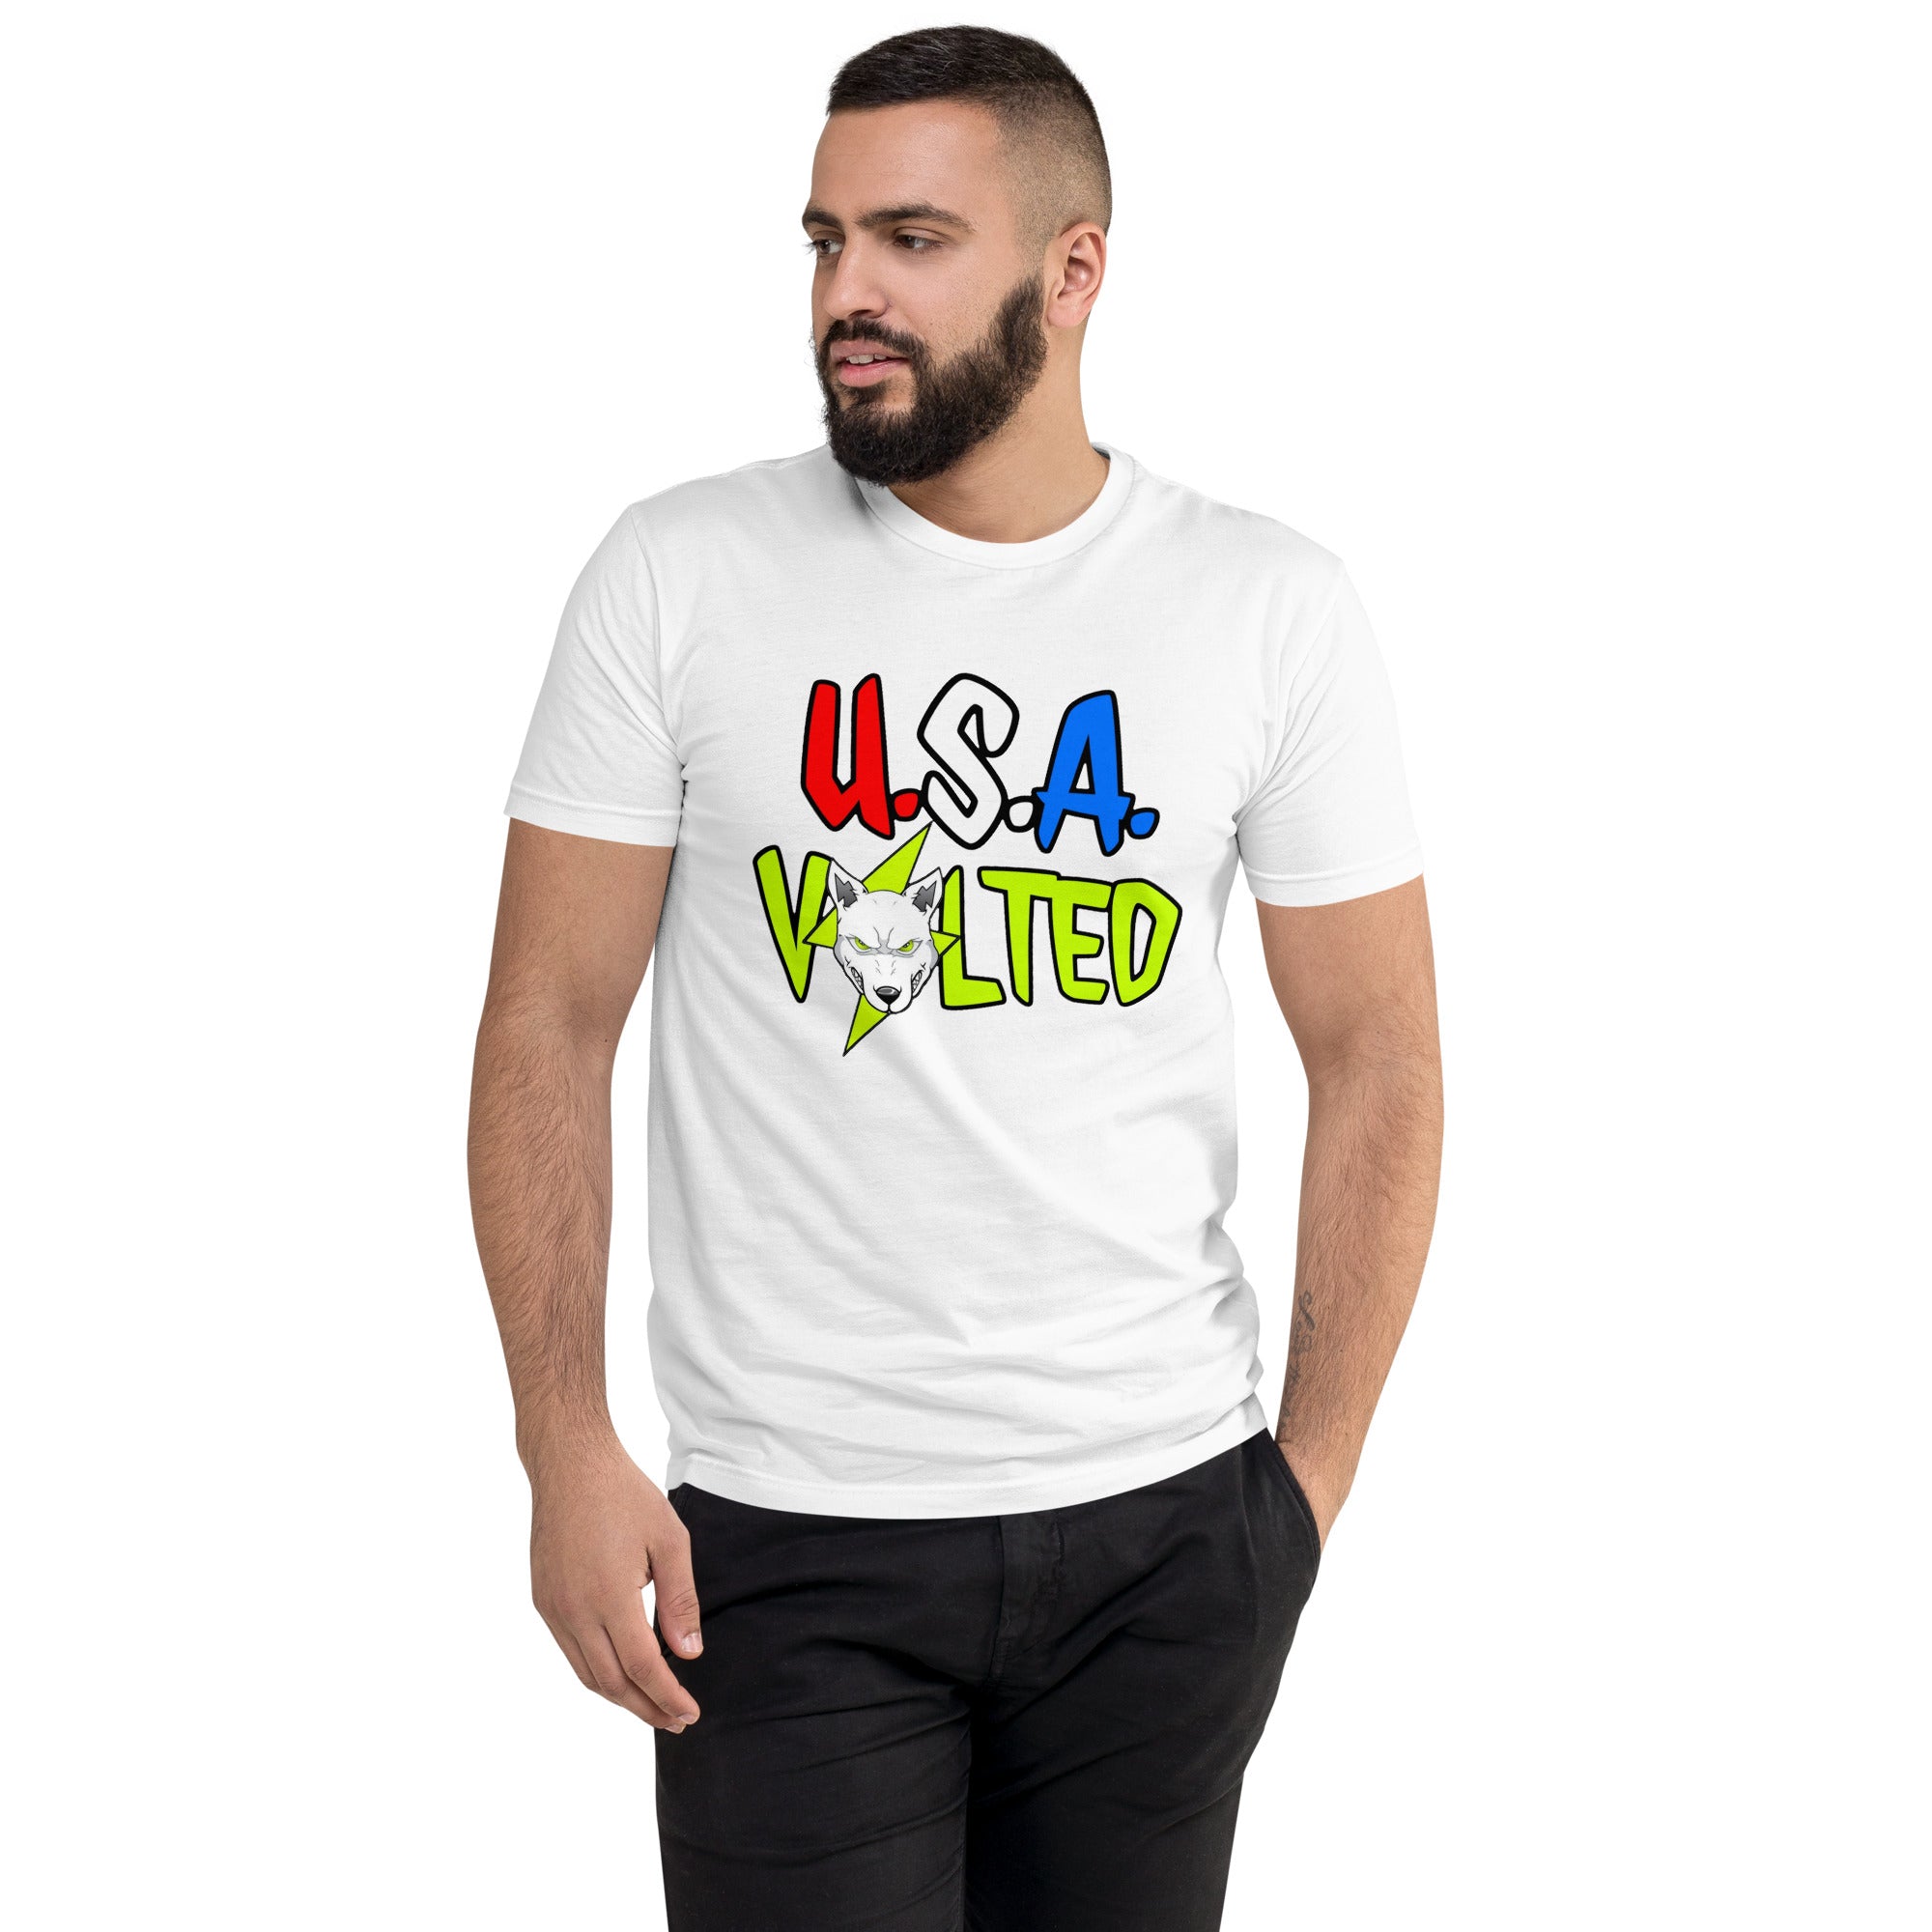 U.S.A VOLTED - NFTees365